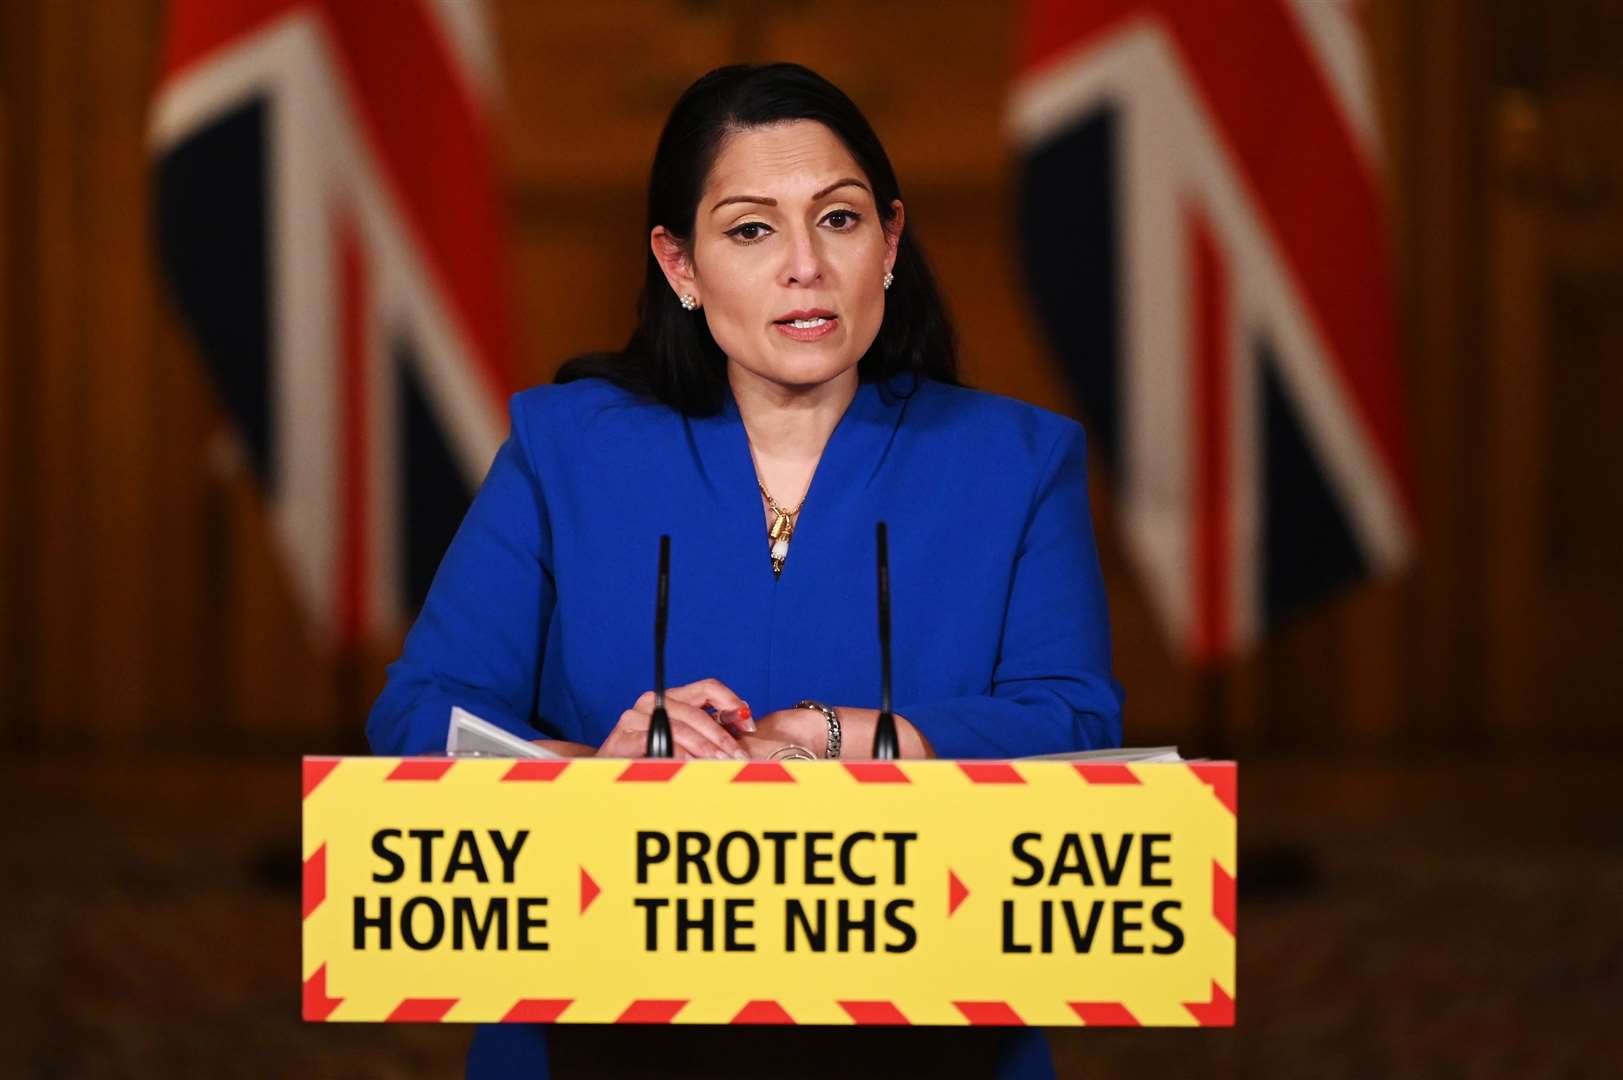 Priti Patel has outlined a new immigration plan which would allow asylum seekers arriving legally to stay in the UK